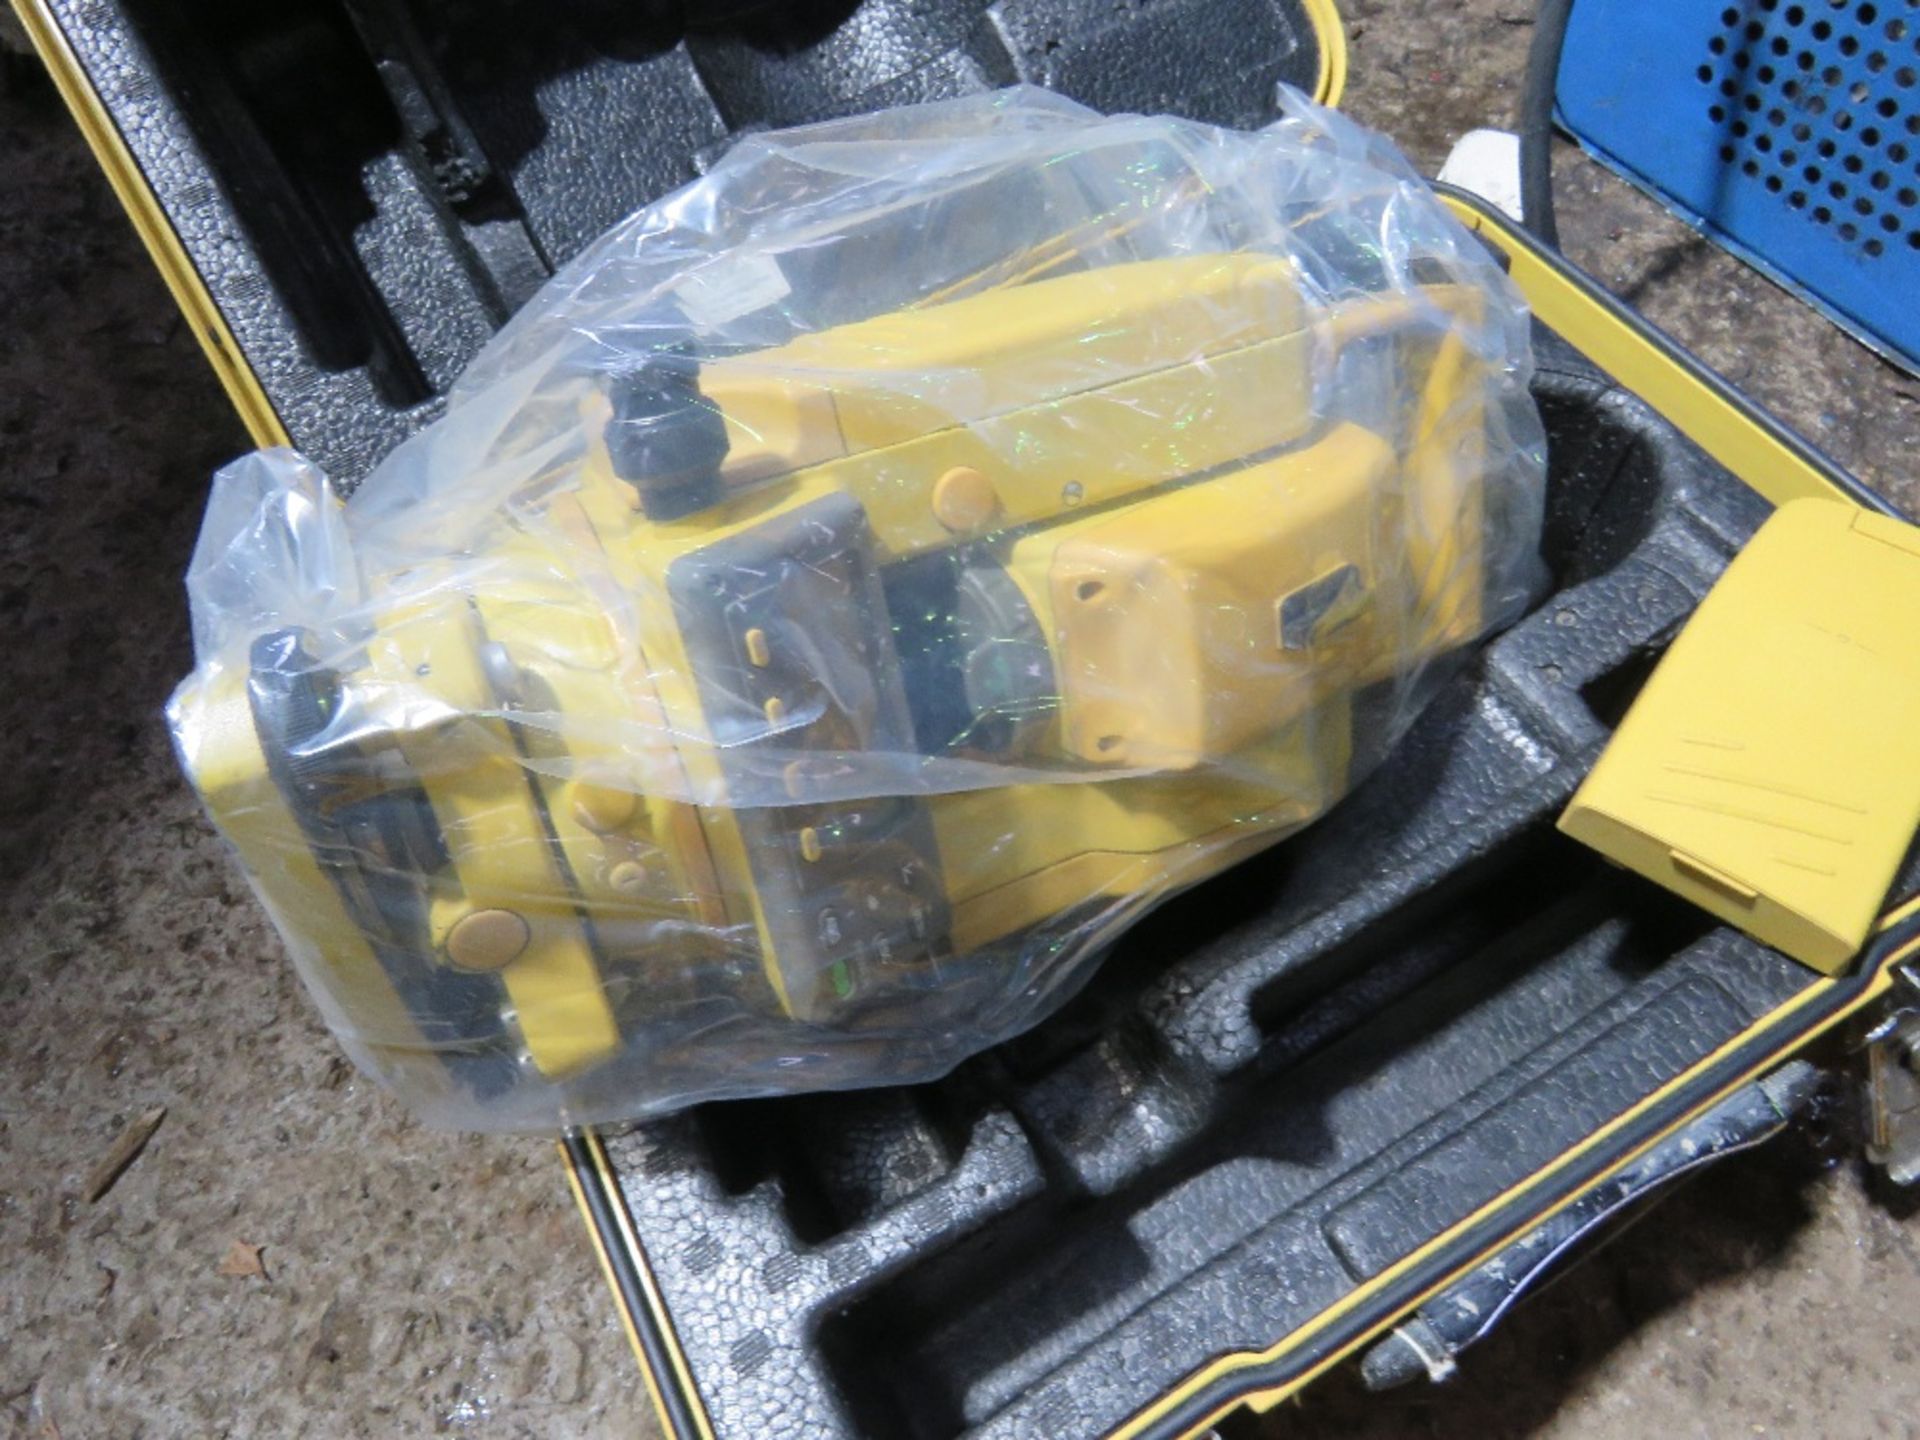 TOPCON GTS2100 TOTAL SURVEY STATION THEODOLITE IN A CASE. DIRECT FROM LOCAL COMPANY DUE TO A CHANGE - Image 2 of 3